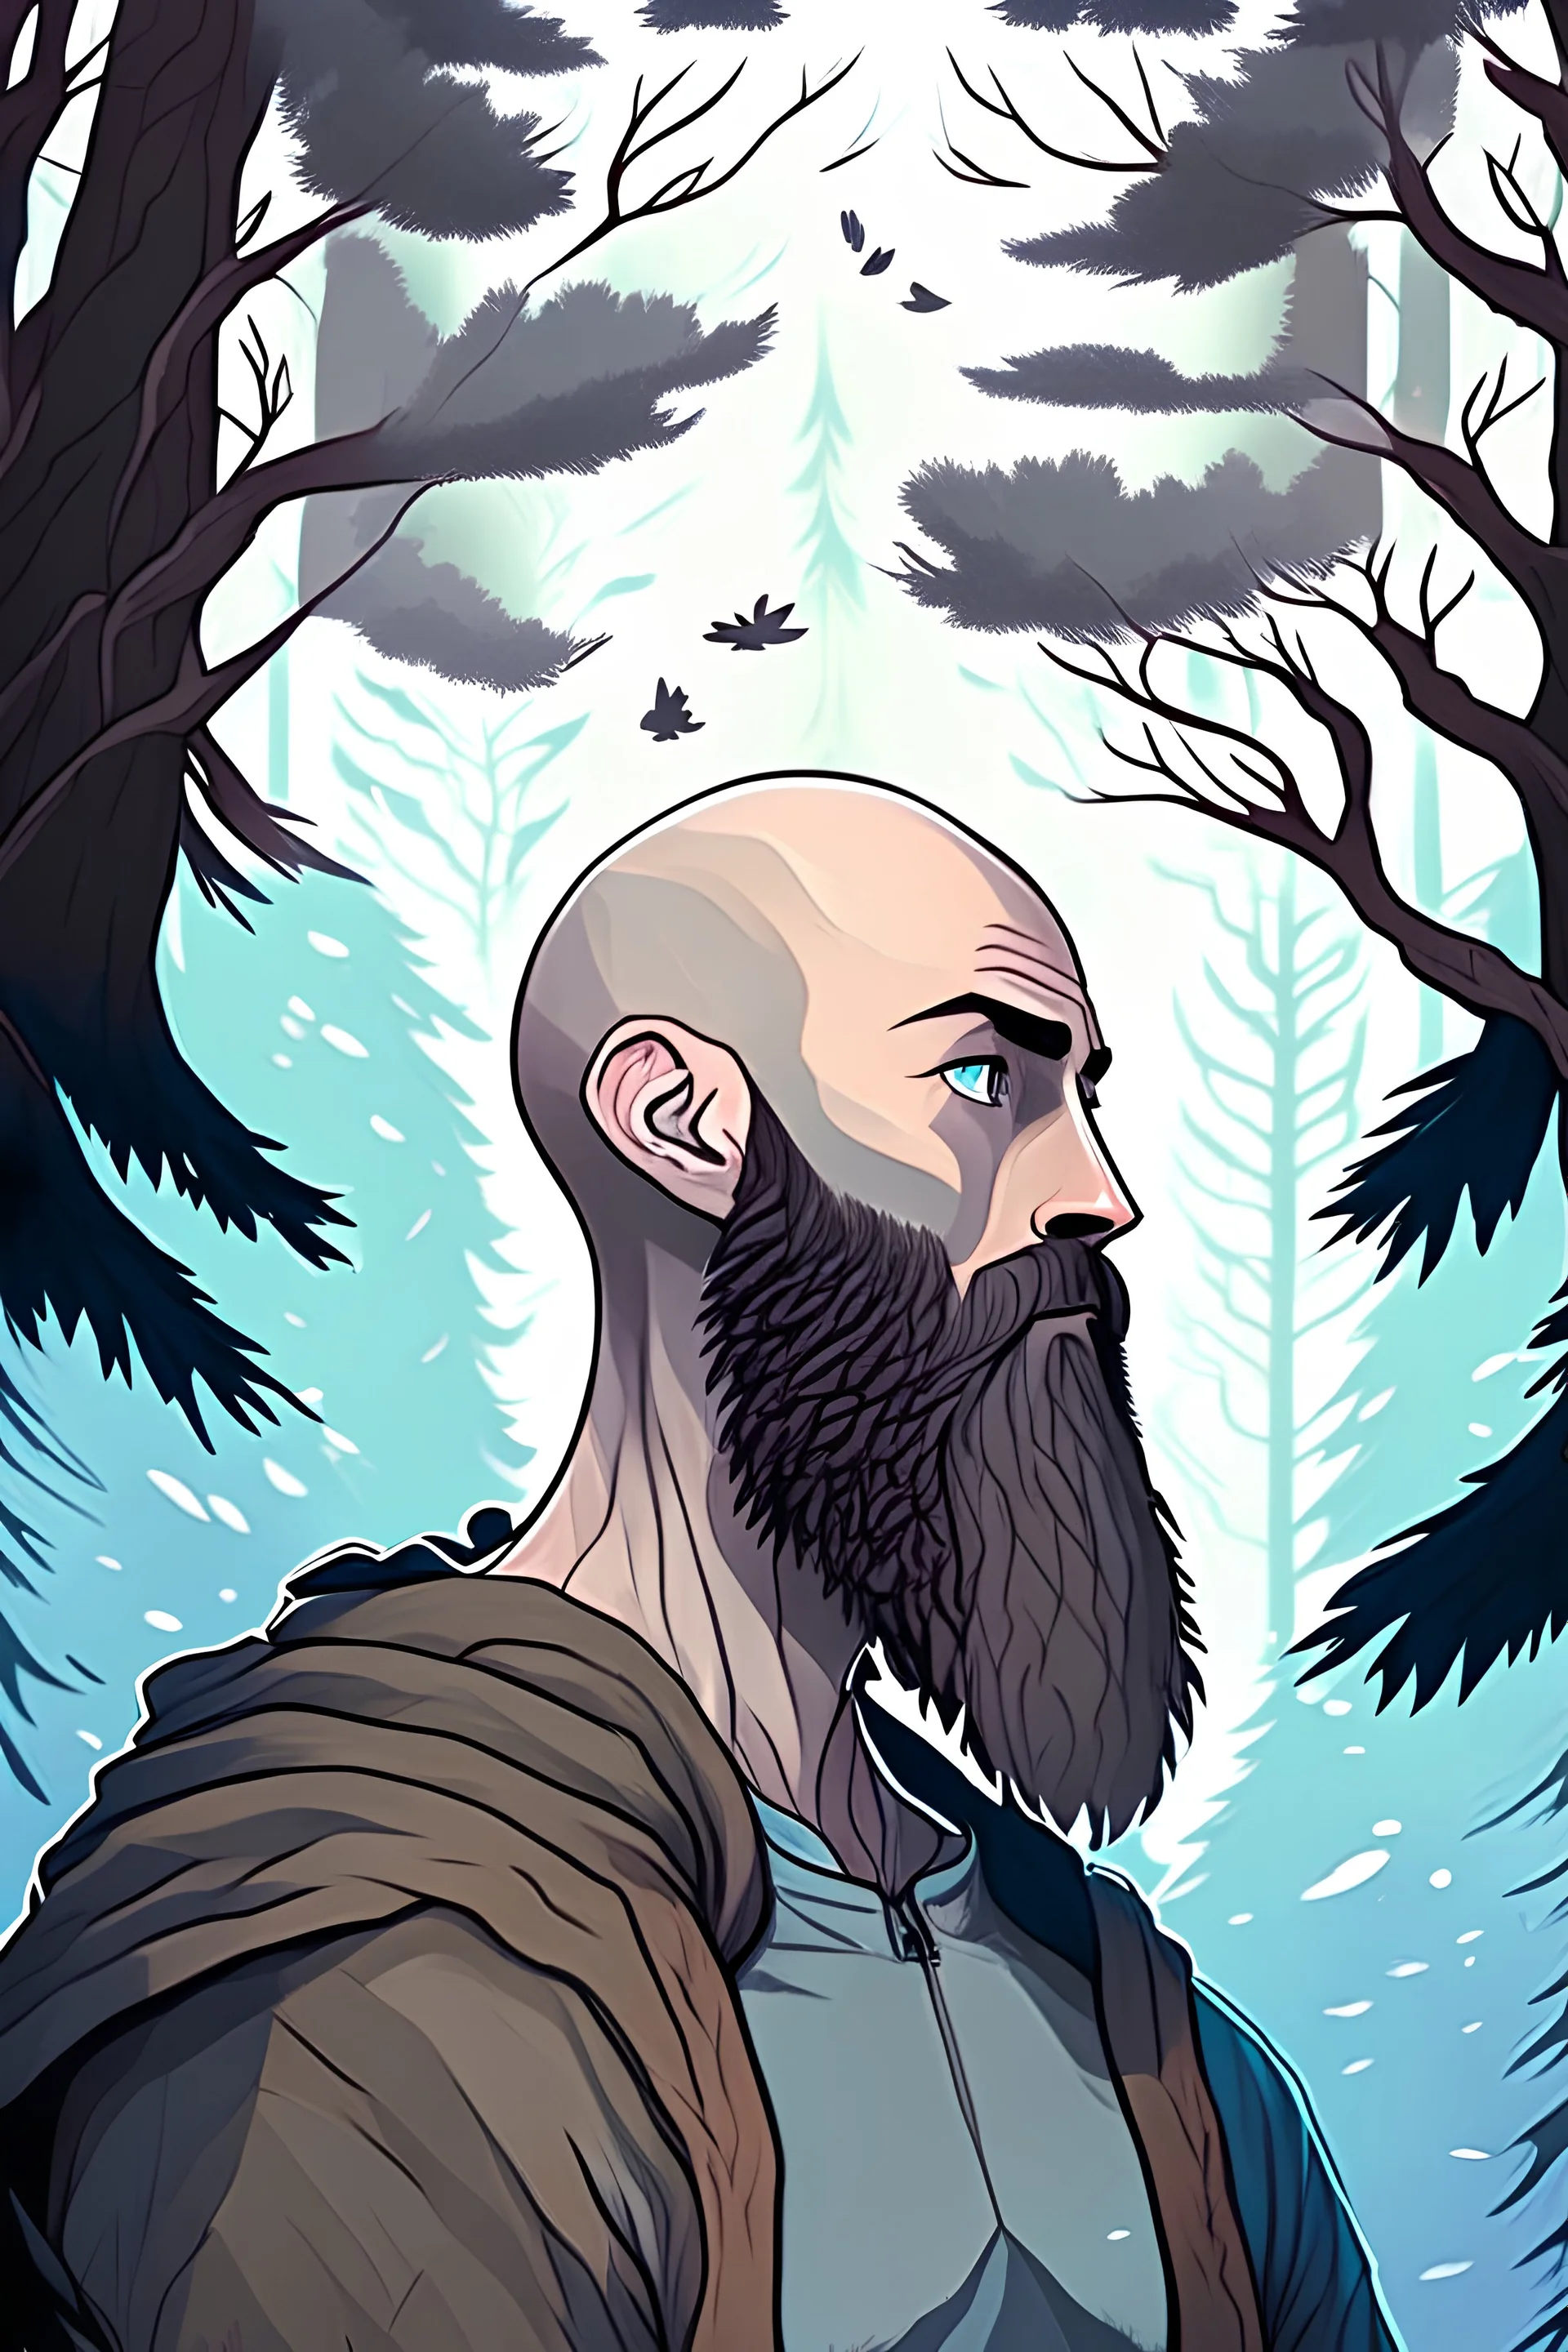 A tall, 30 year old bald man with a light brown beard. Beautiful misty color scheme. his skin is very pale, he has shadows under his eyes, his eyes are blue. He is rendered in the style of an anime and he is travelling through his dreams. In the dream is a great forest and spiritual creatures.